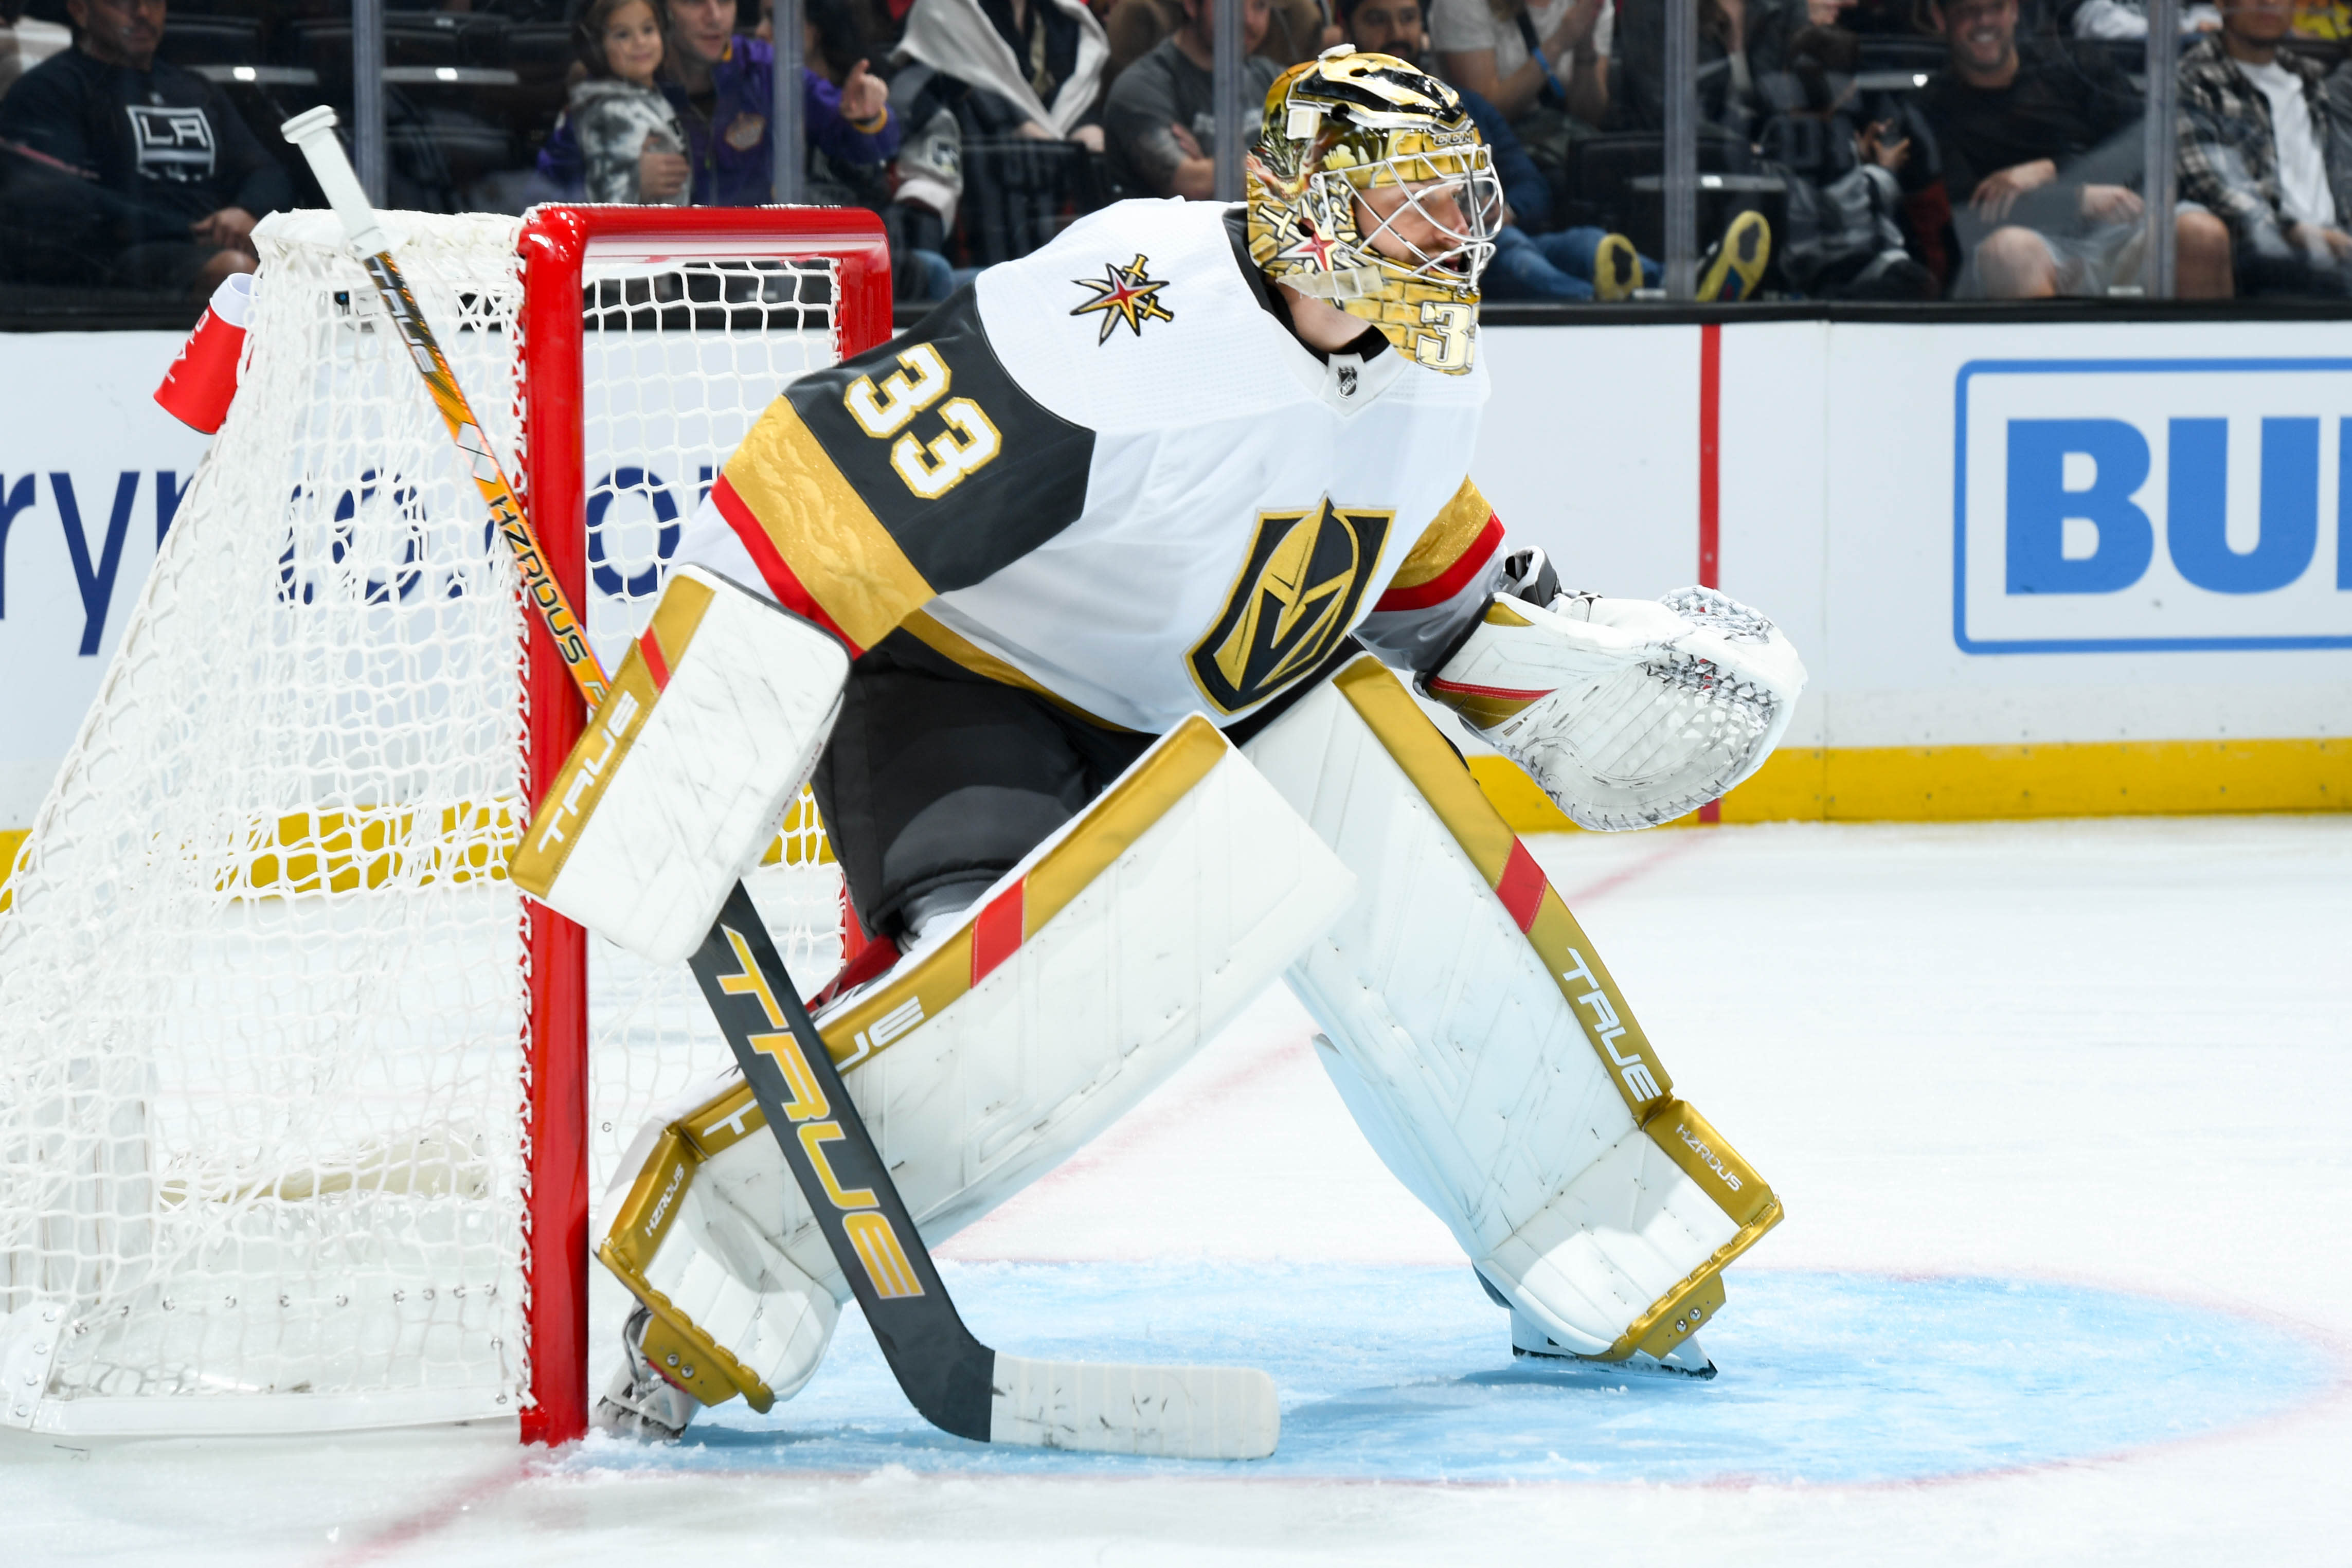 Agent For VGK's Marc-Andre Fleury Removes Shocking, Drama-Creating Tweet  Showing Image Of Fleury Being Stabbed In Back By Sword With DeBoer's Name  On it - LVSportsBiz